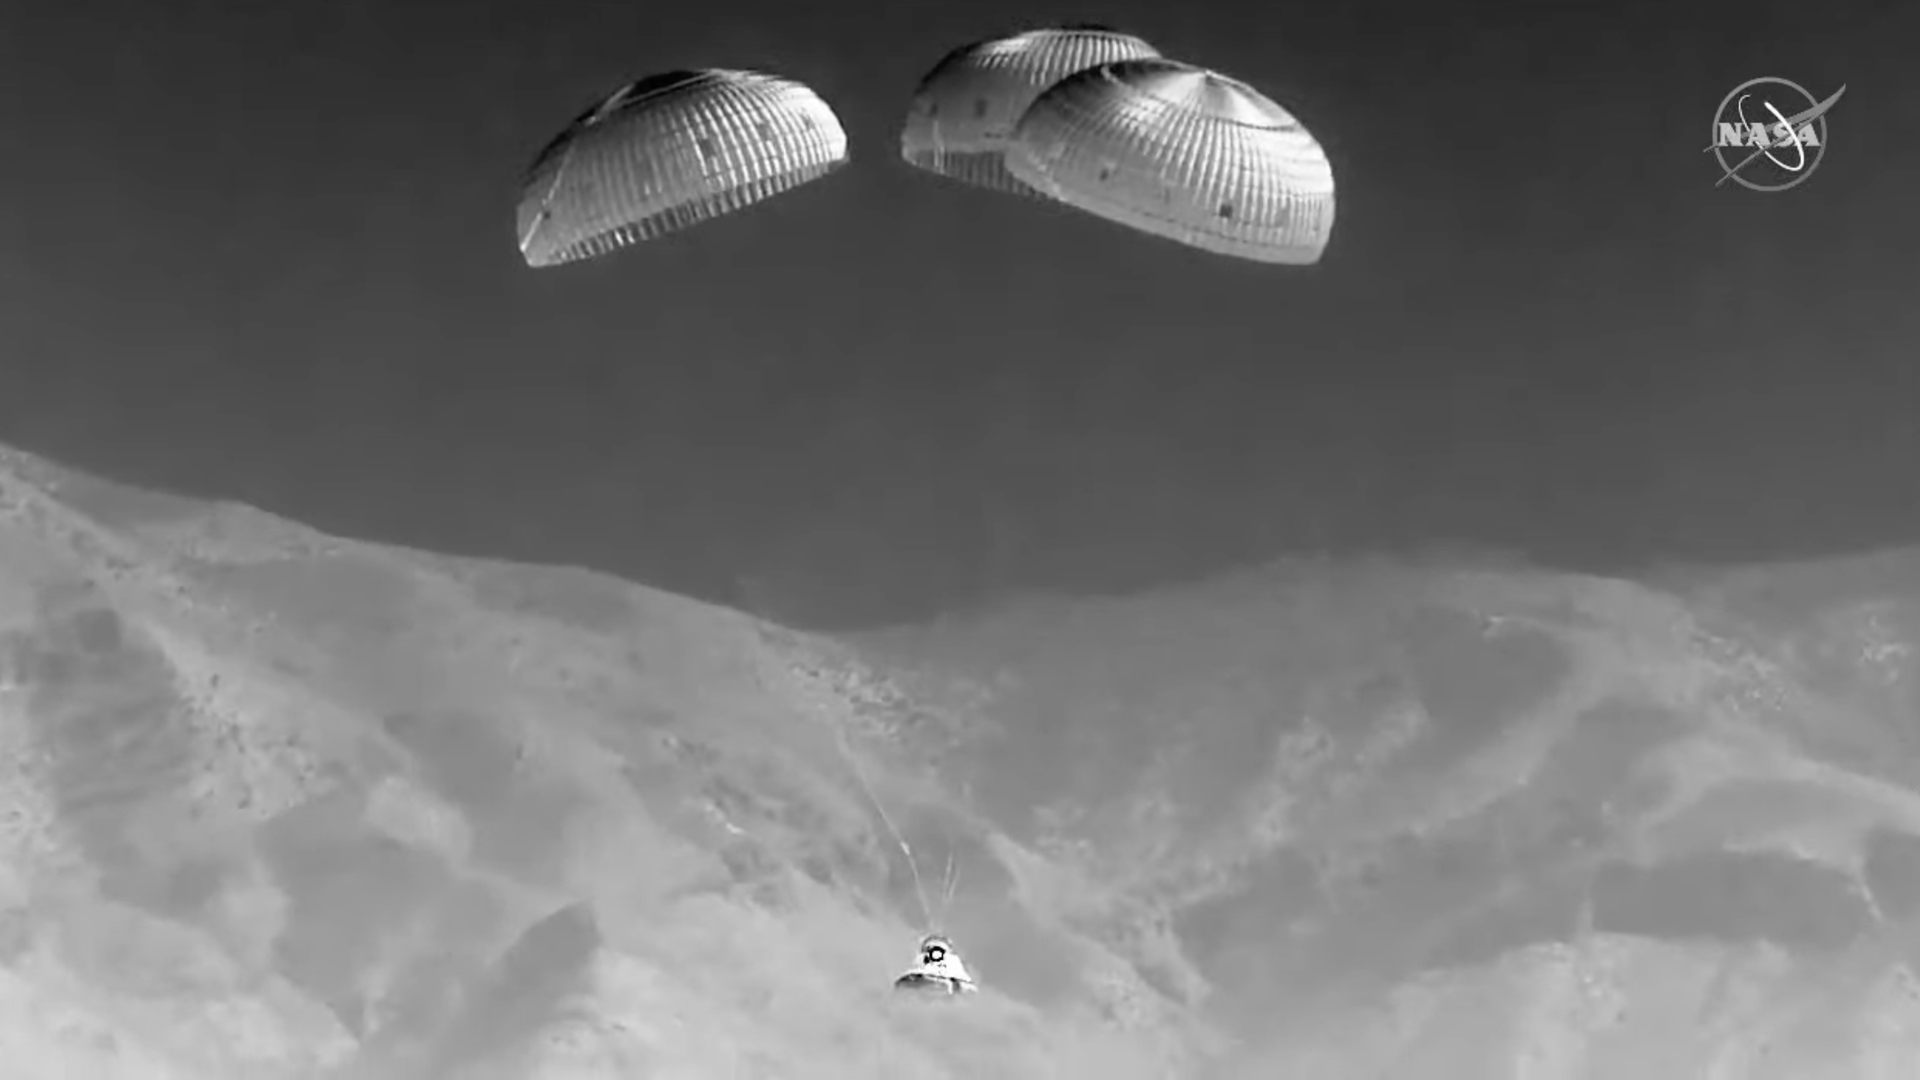 Starliner coming back to Earth in black and white with mountains behind it